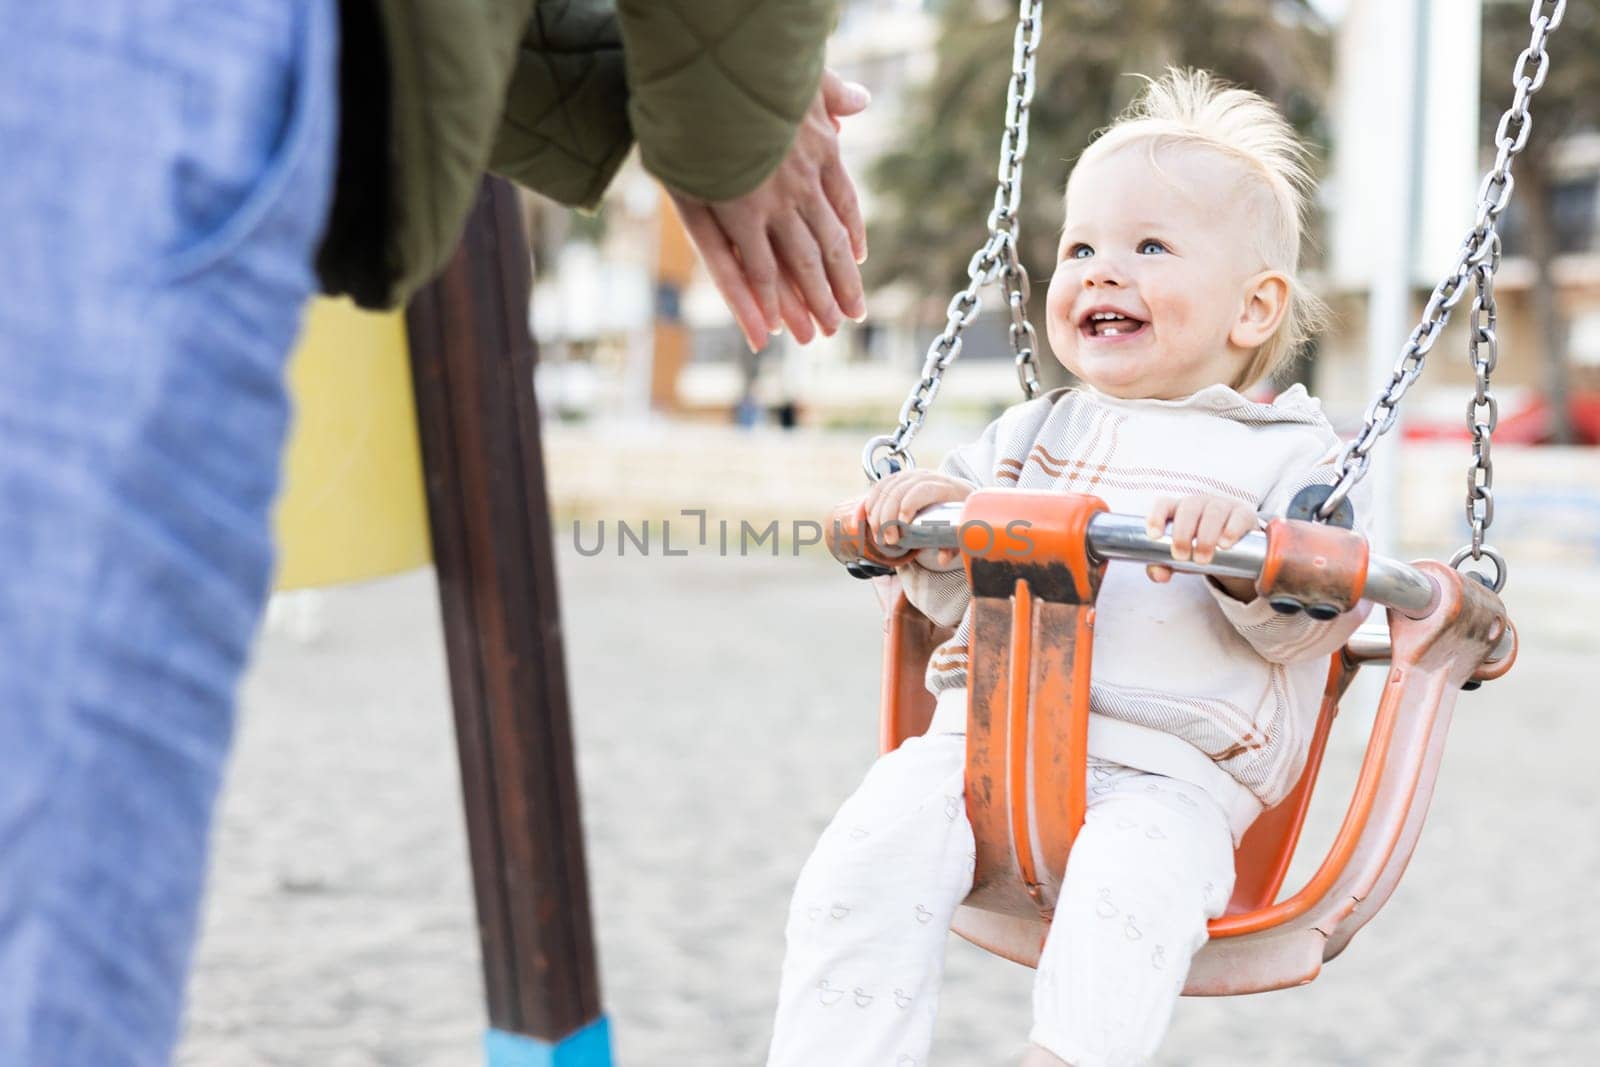 Mother pushing her cheerful infant baby boy child on a swing on sandy beach playground outdoors on nice sunny cold winter day in Malaga, Spain. by kasto